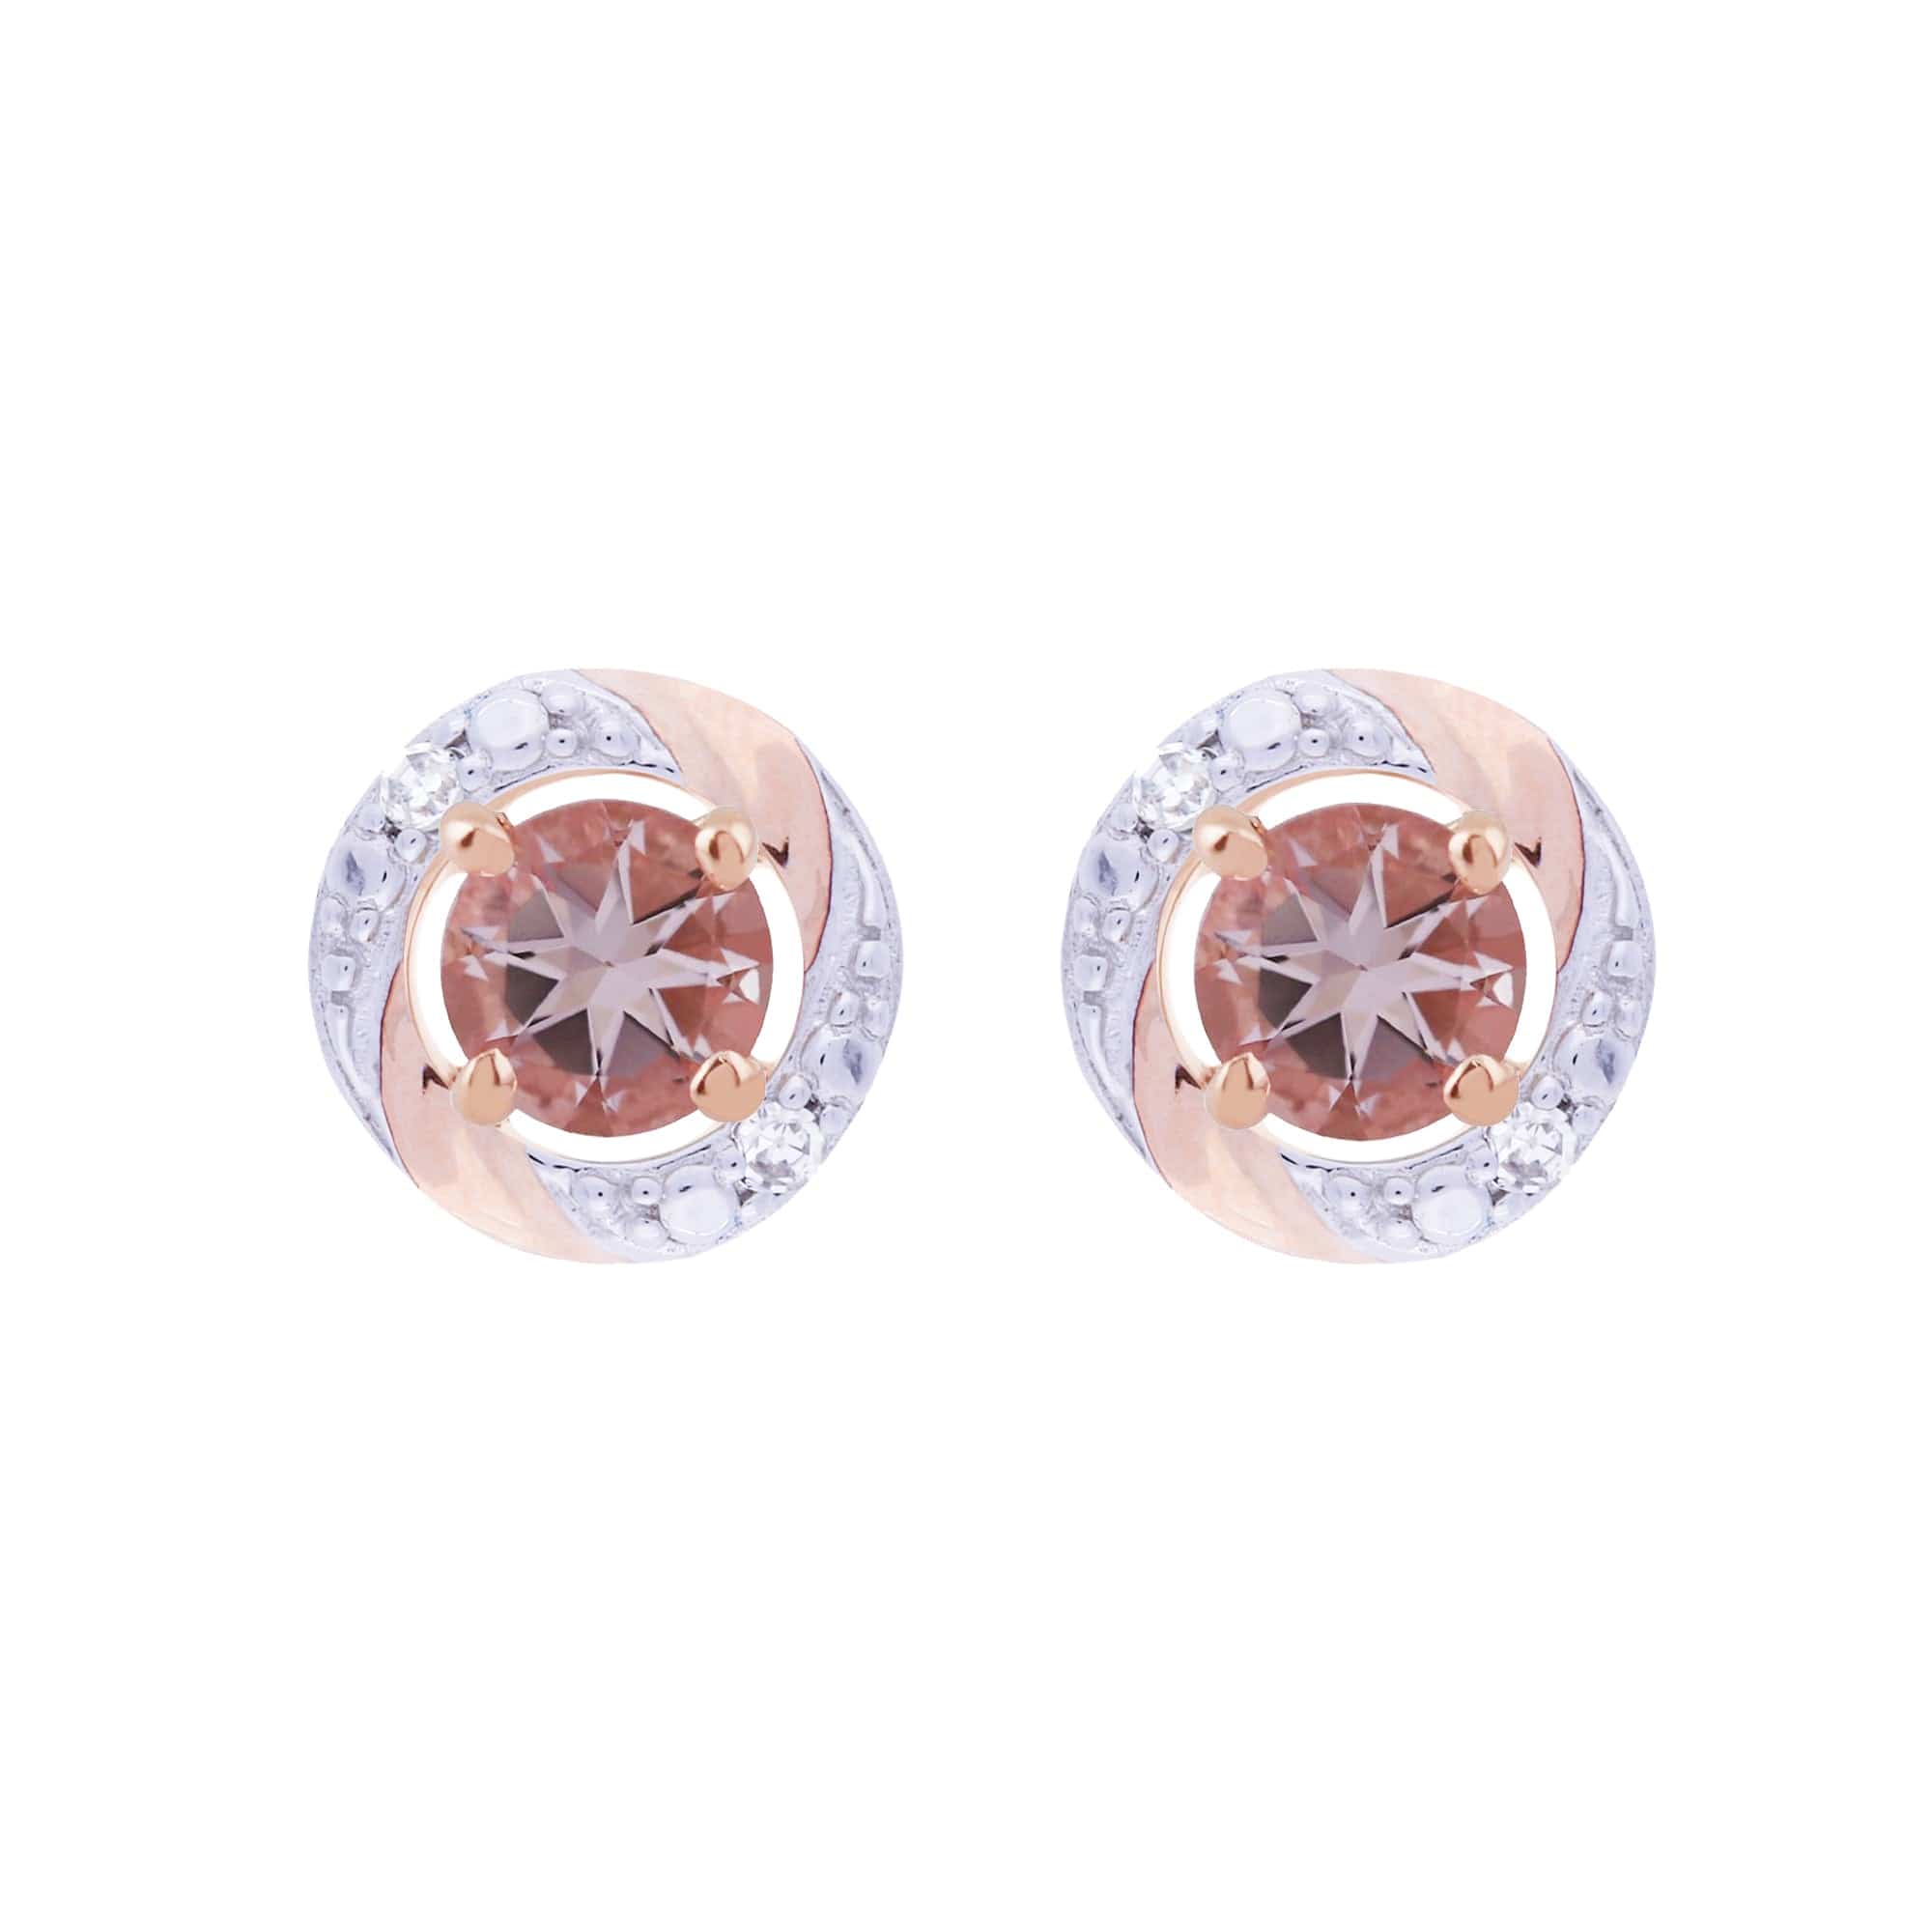 183E4316019-191E0378019 Classic Round Morganite Stud Earrings with Detachable Diamond Round Earrings Jacket Set in 9ct Rose Gold 1